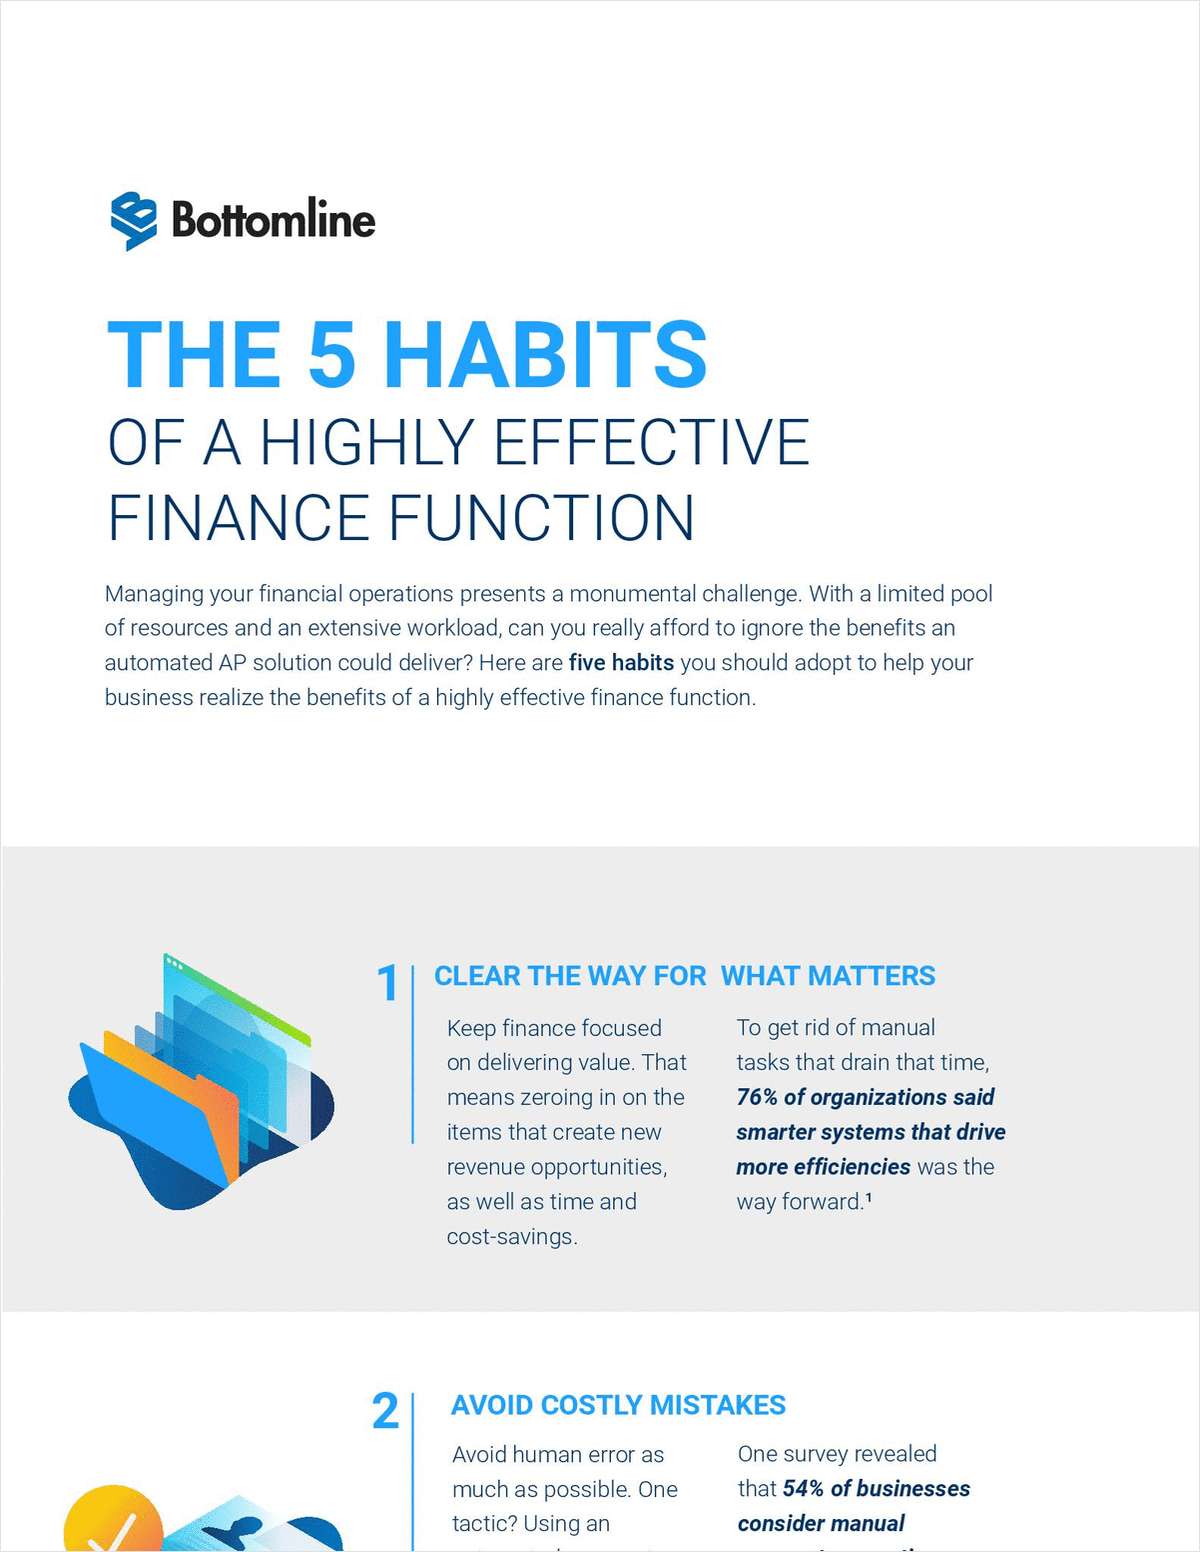 The 5 Habits of a Highly Effective Finance Function